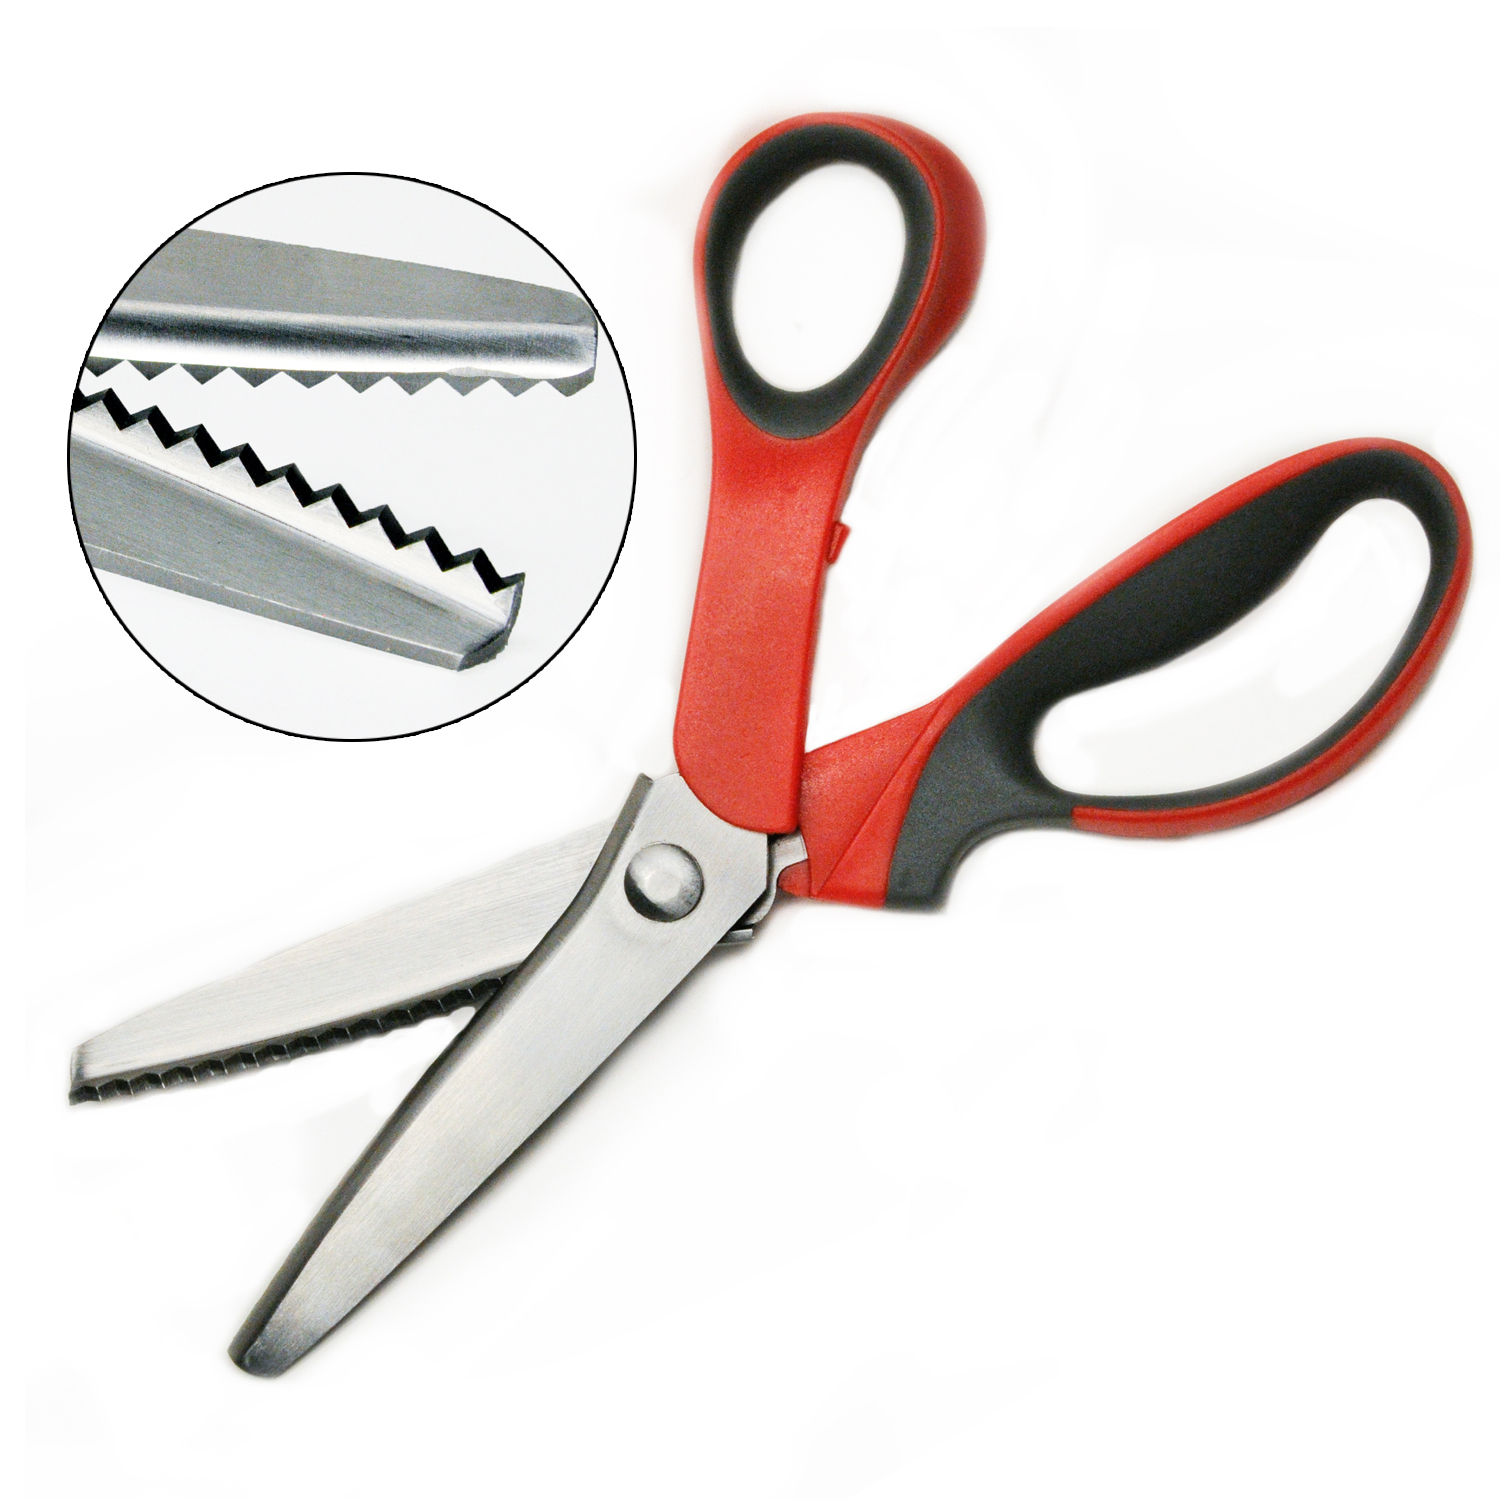 Zig Zag Pinking Shears Scissors for Fabric Sewing Pinking Shears